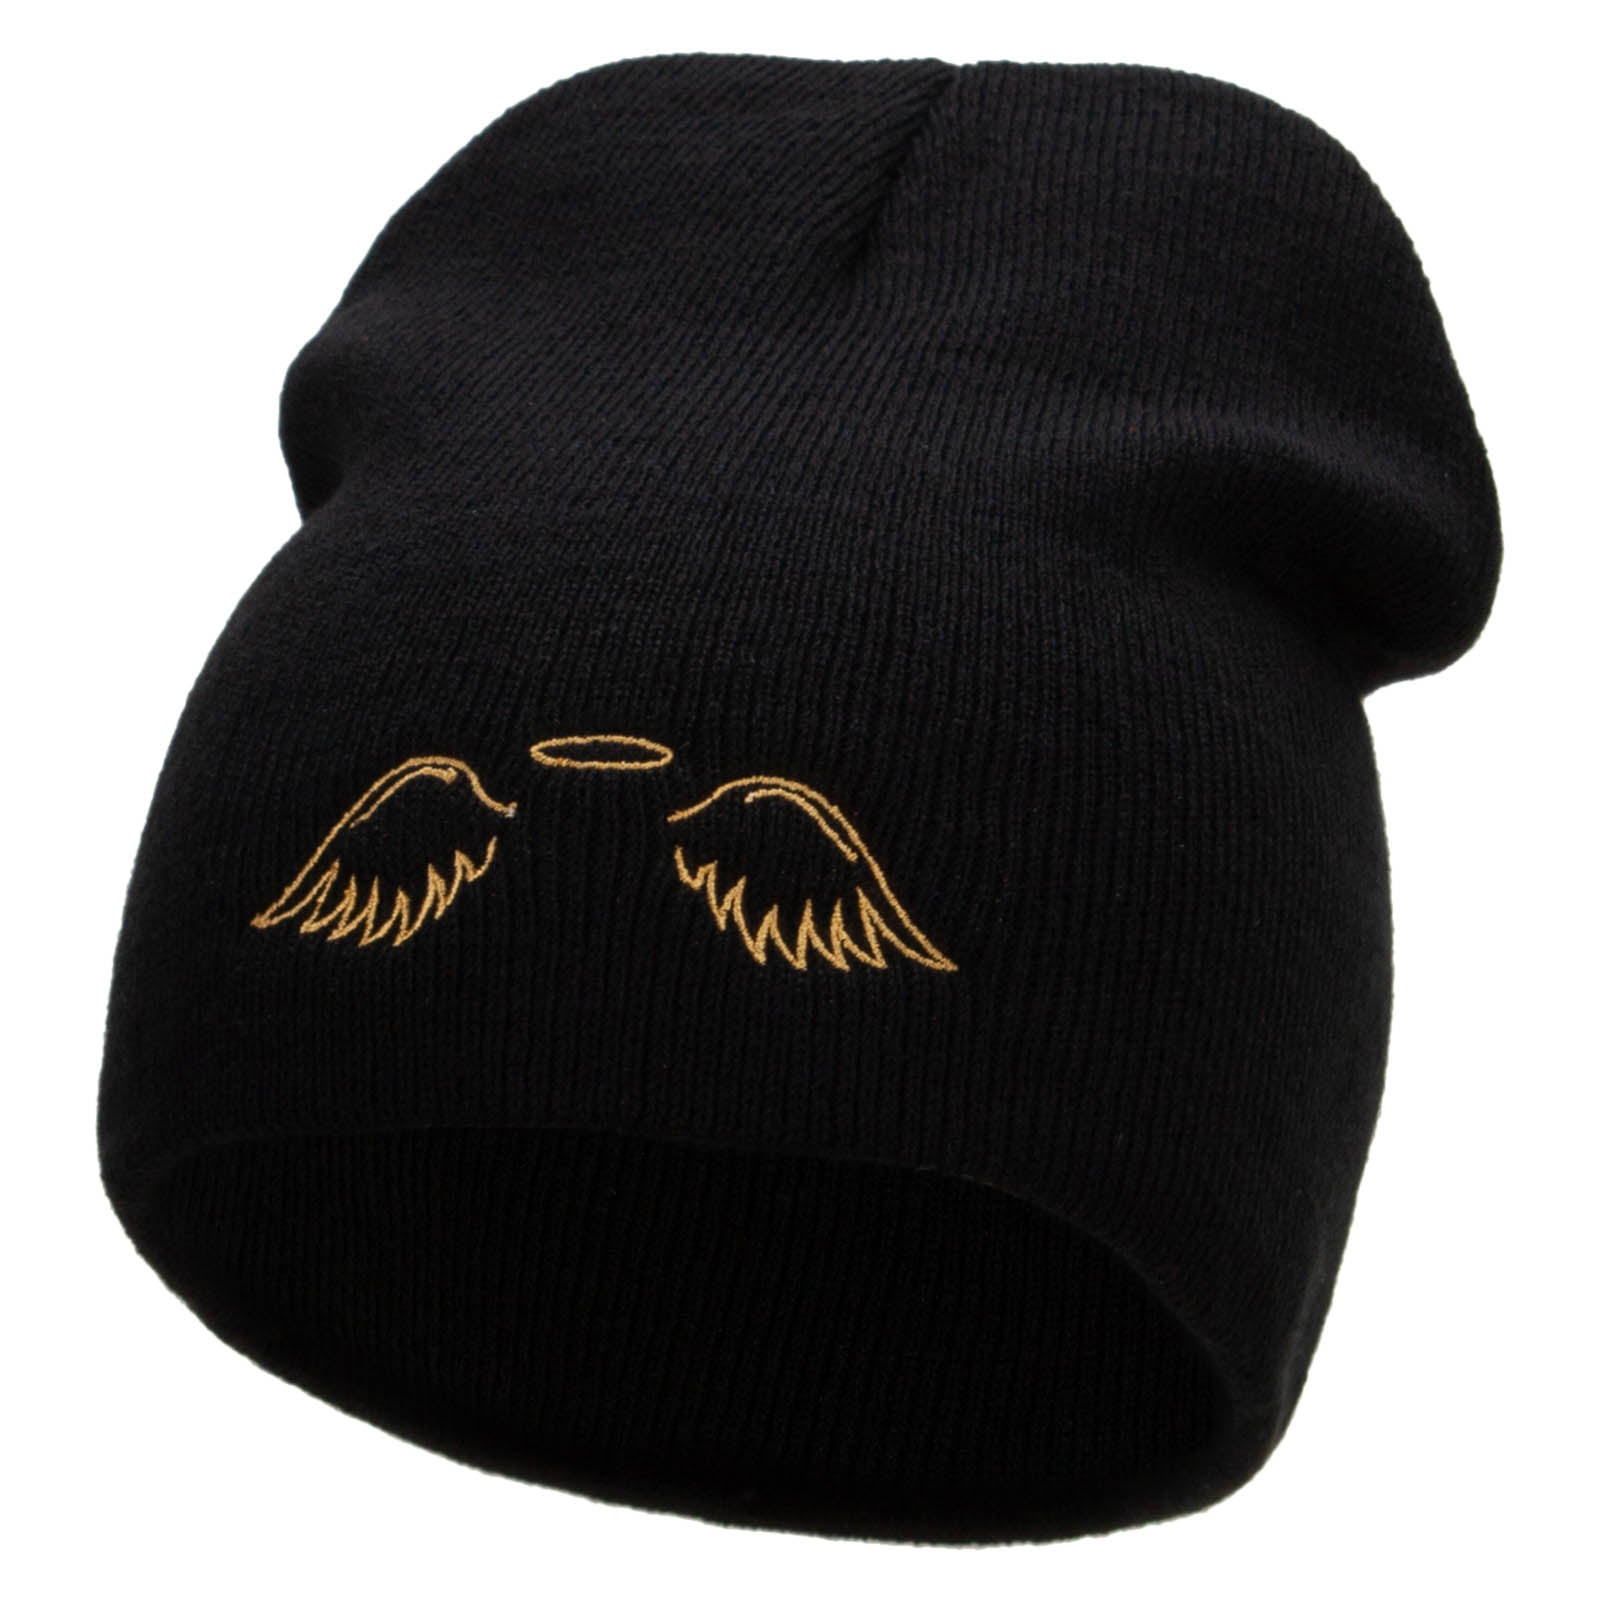 Angel Wings Embroidered 8 inch Acrylic Short Blank Beanie - Black OSFM